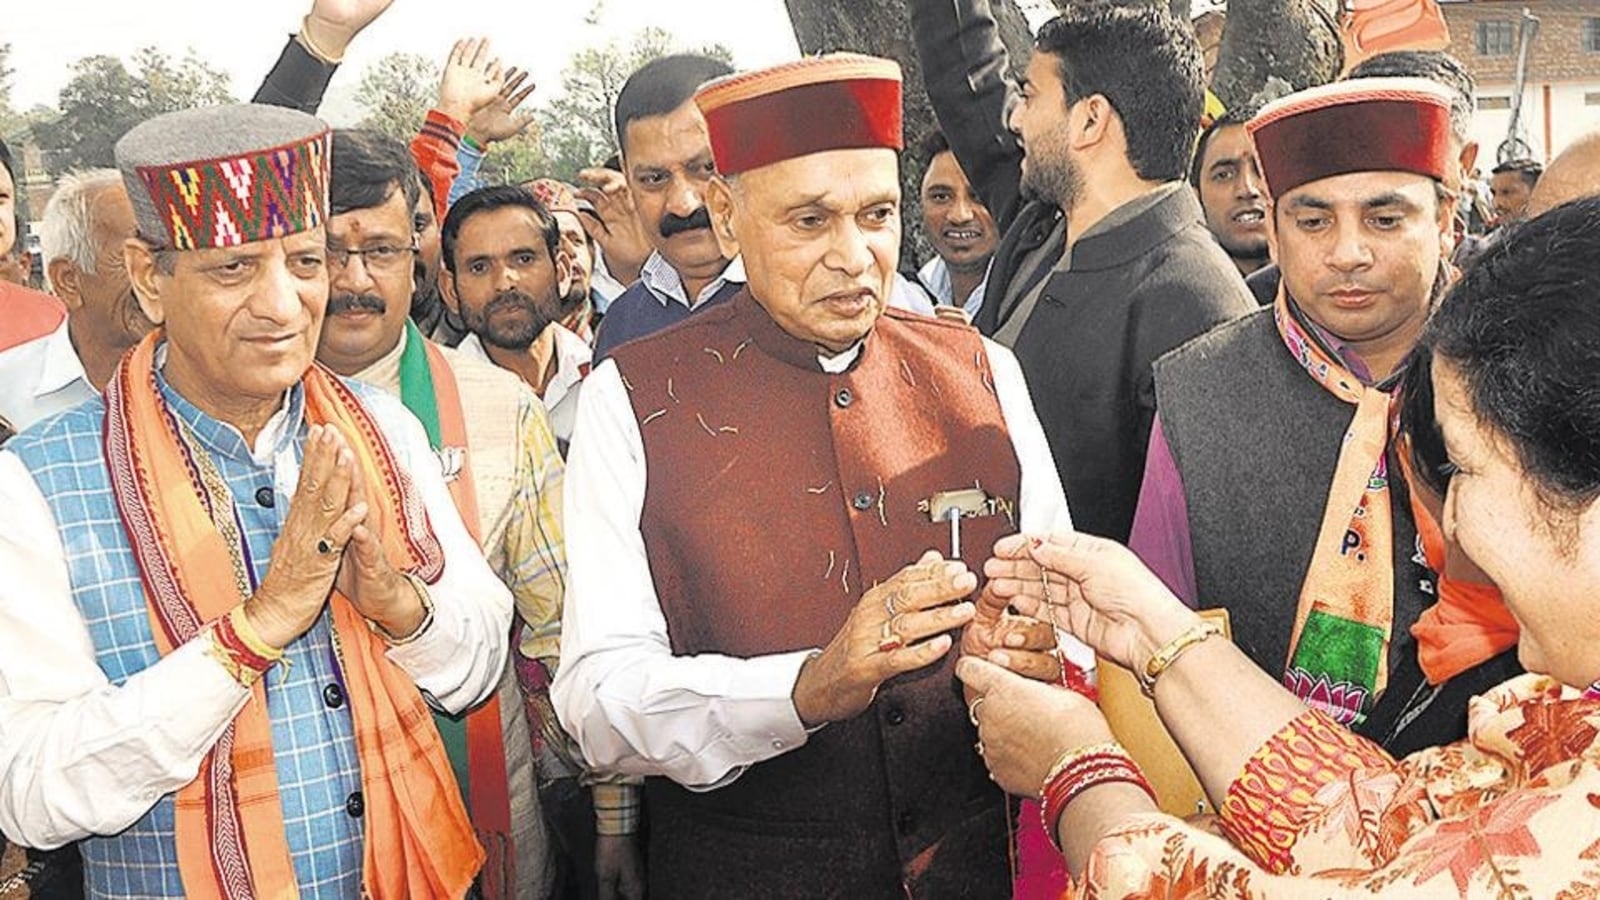 evening-brief-congress-and-bjp-wary-of-dhumal-factor-in-himachal-pradesh-and-all-the-latest-news